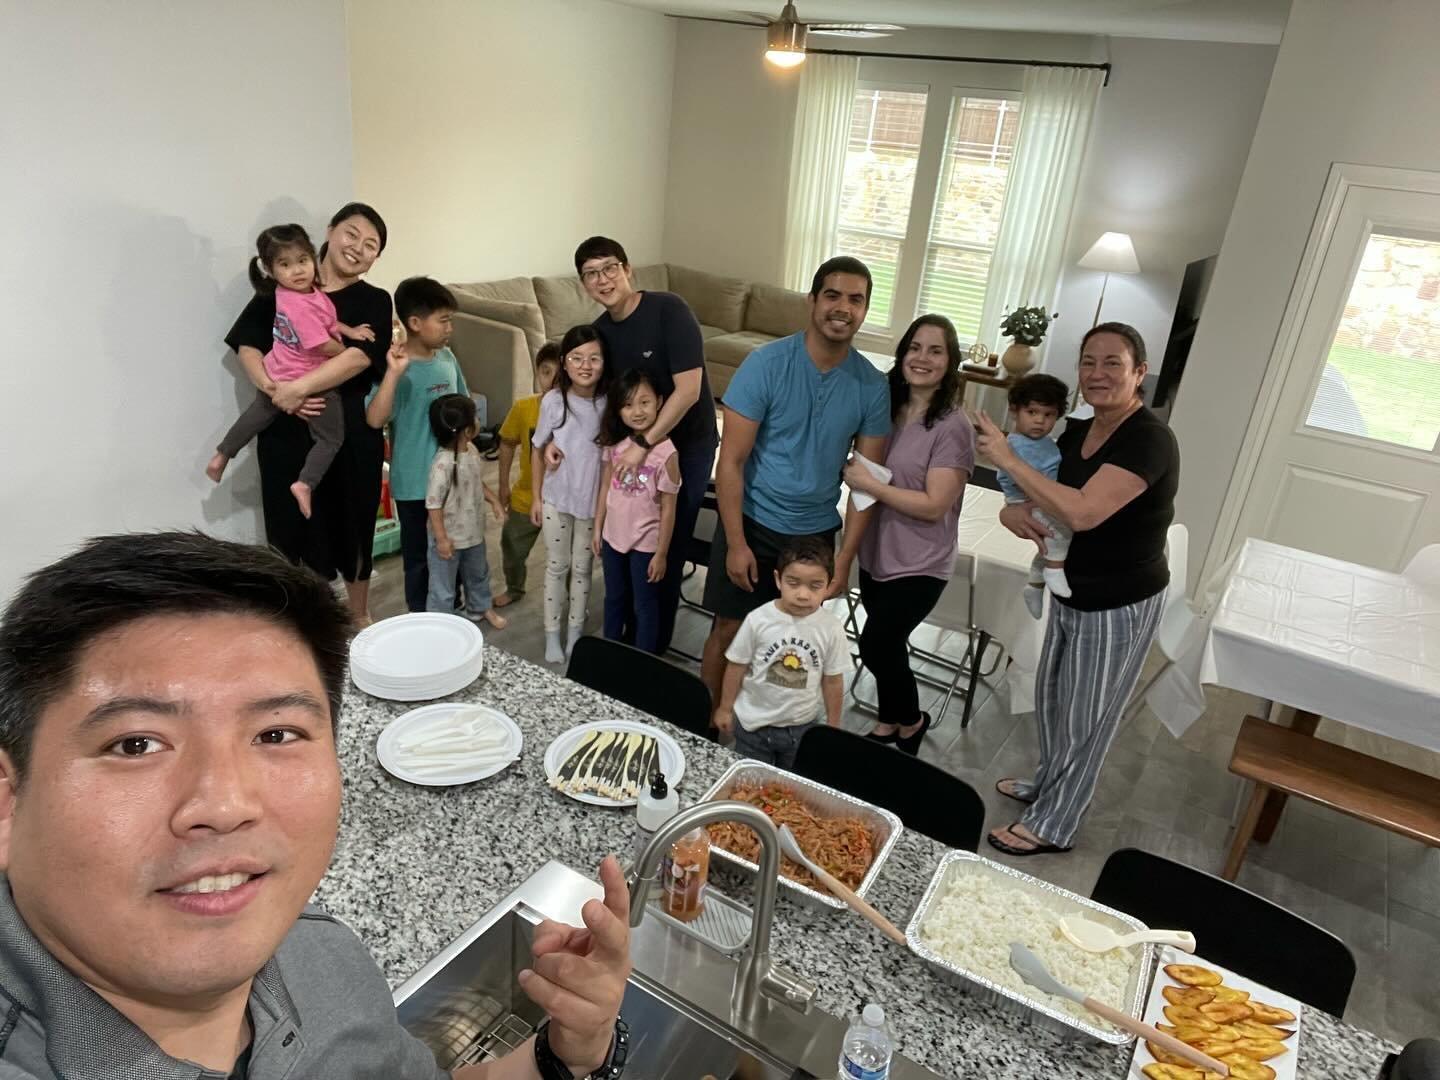 We @tccdfw had the family gathering at Andres&rsquo; family house on last Saturday. Andres and Betsy opened their house for this fellowship with warm welcome! Thank you for your serving hands with great Cuban foods :) Great people, great place, and g